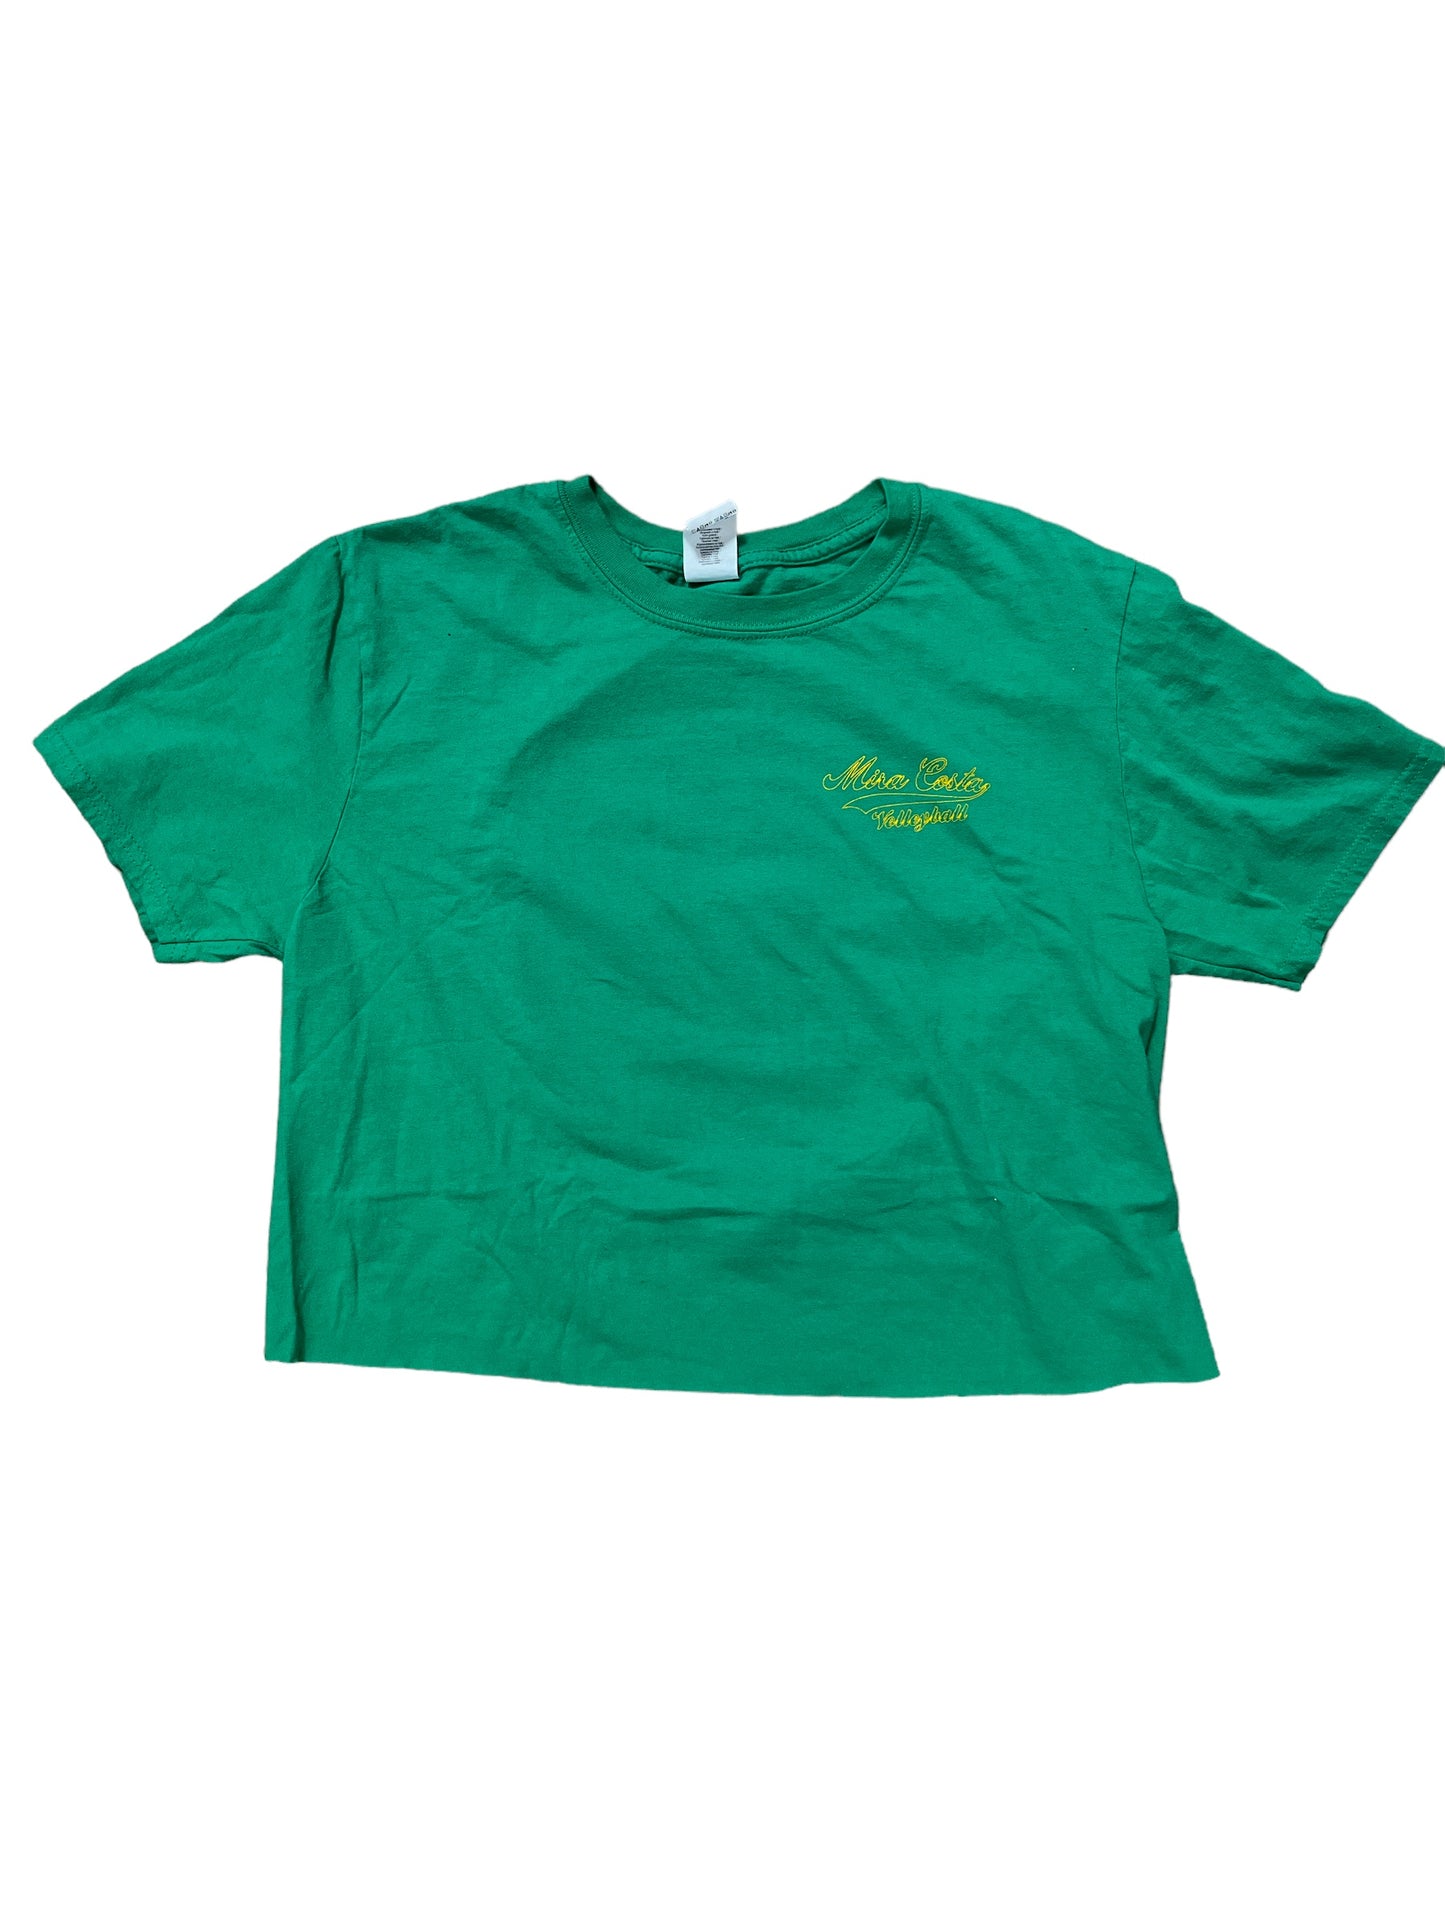 Cropped Graphic Tee - Green (M)